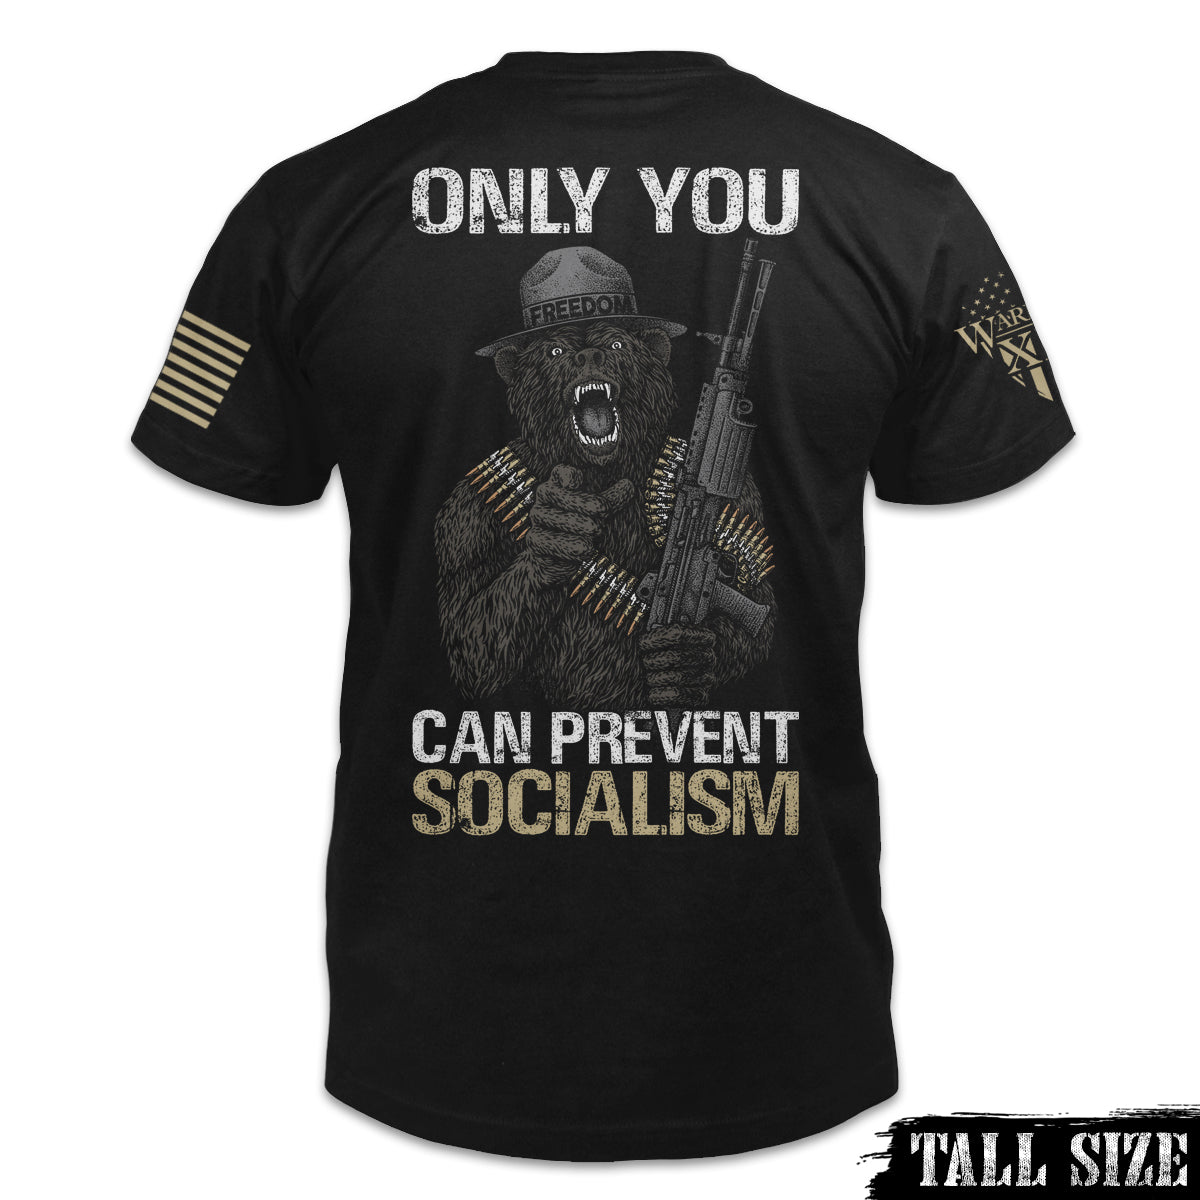 A black tall size shirt with the words "Only you can prevent socialism" with a gorilla holding a gun printed on the back of the  shirt.